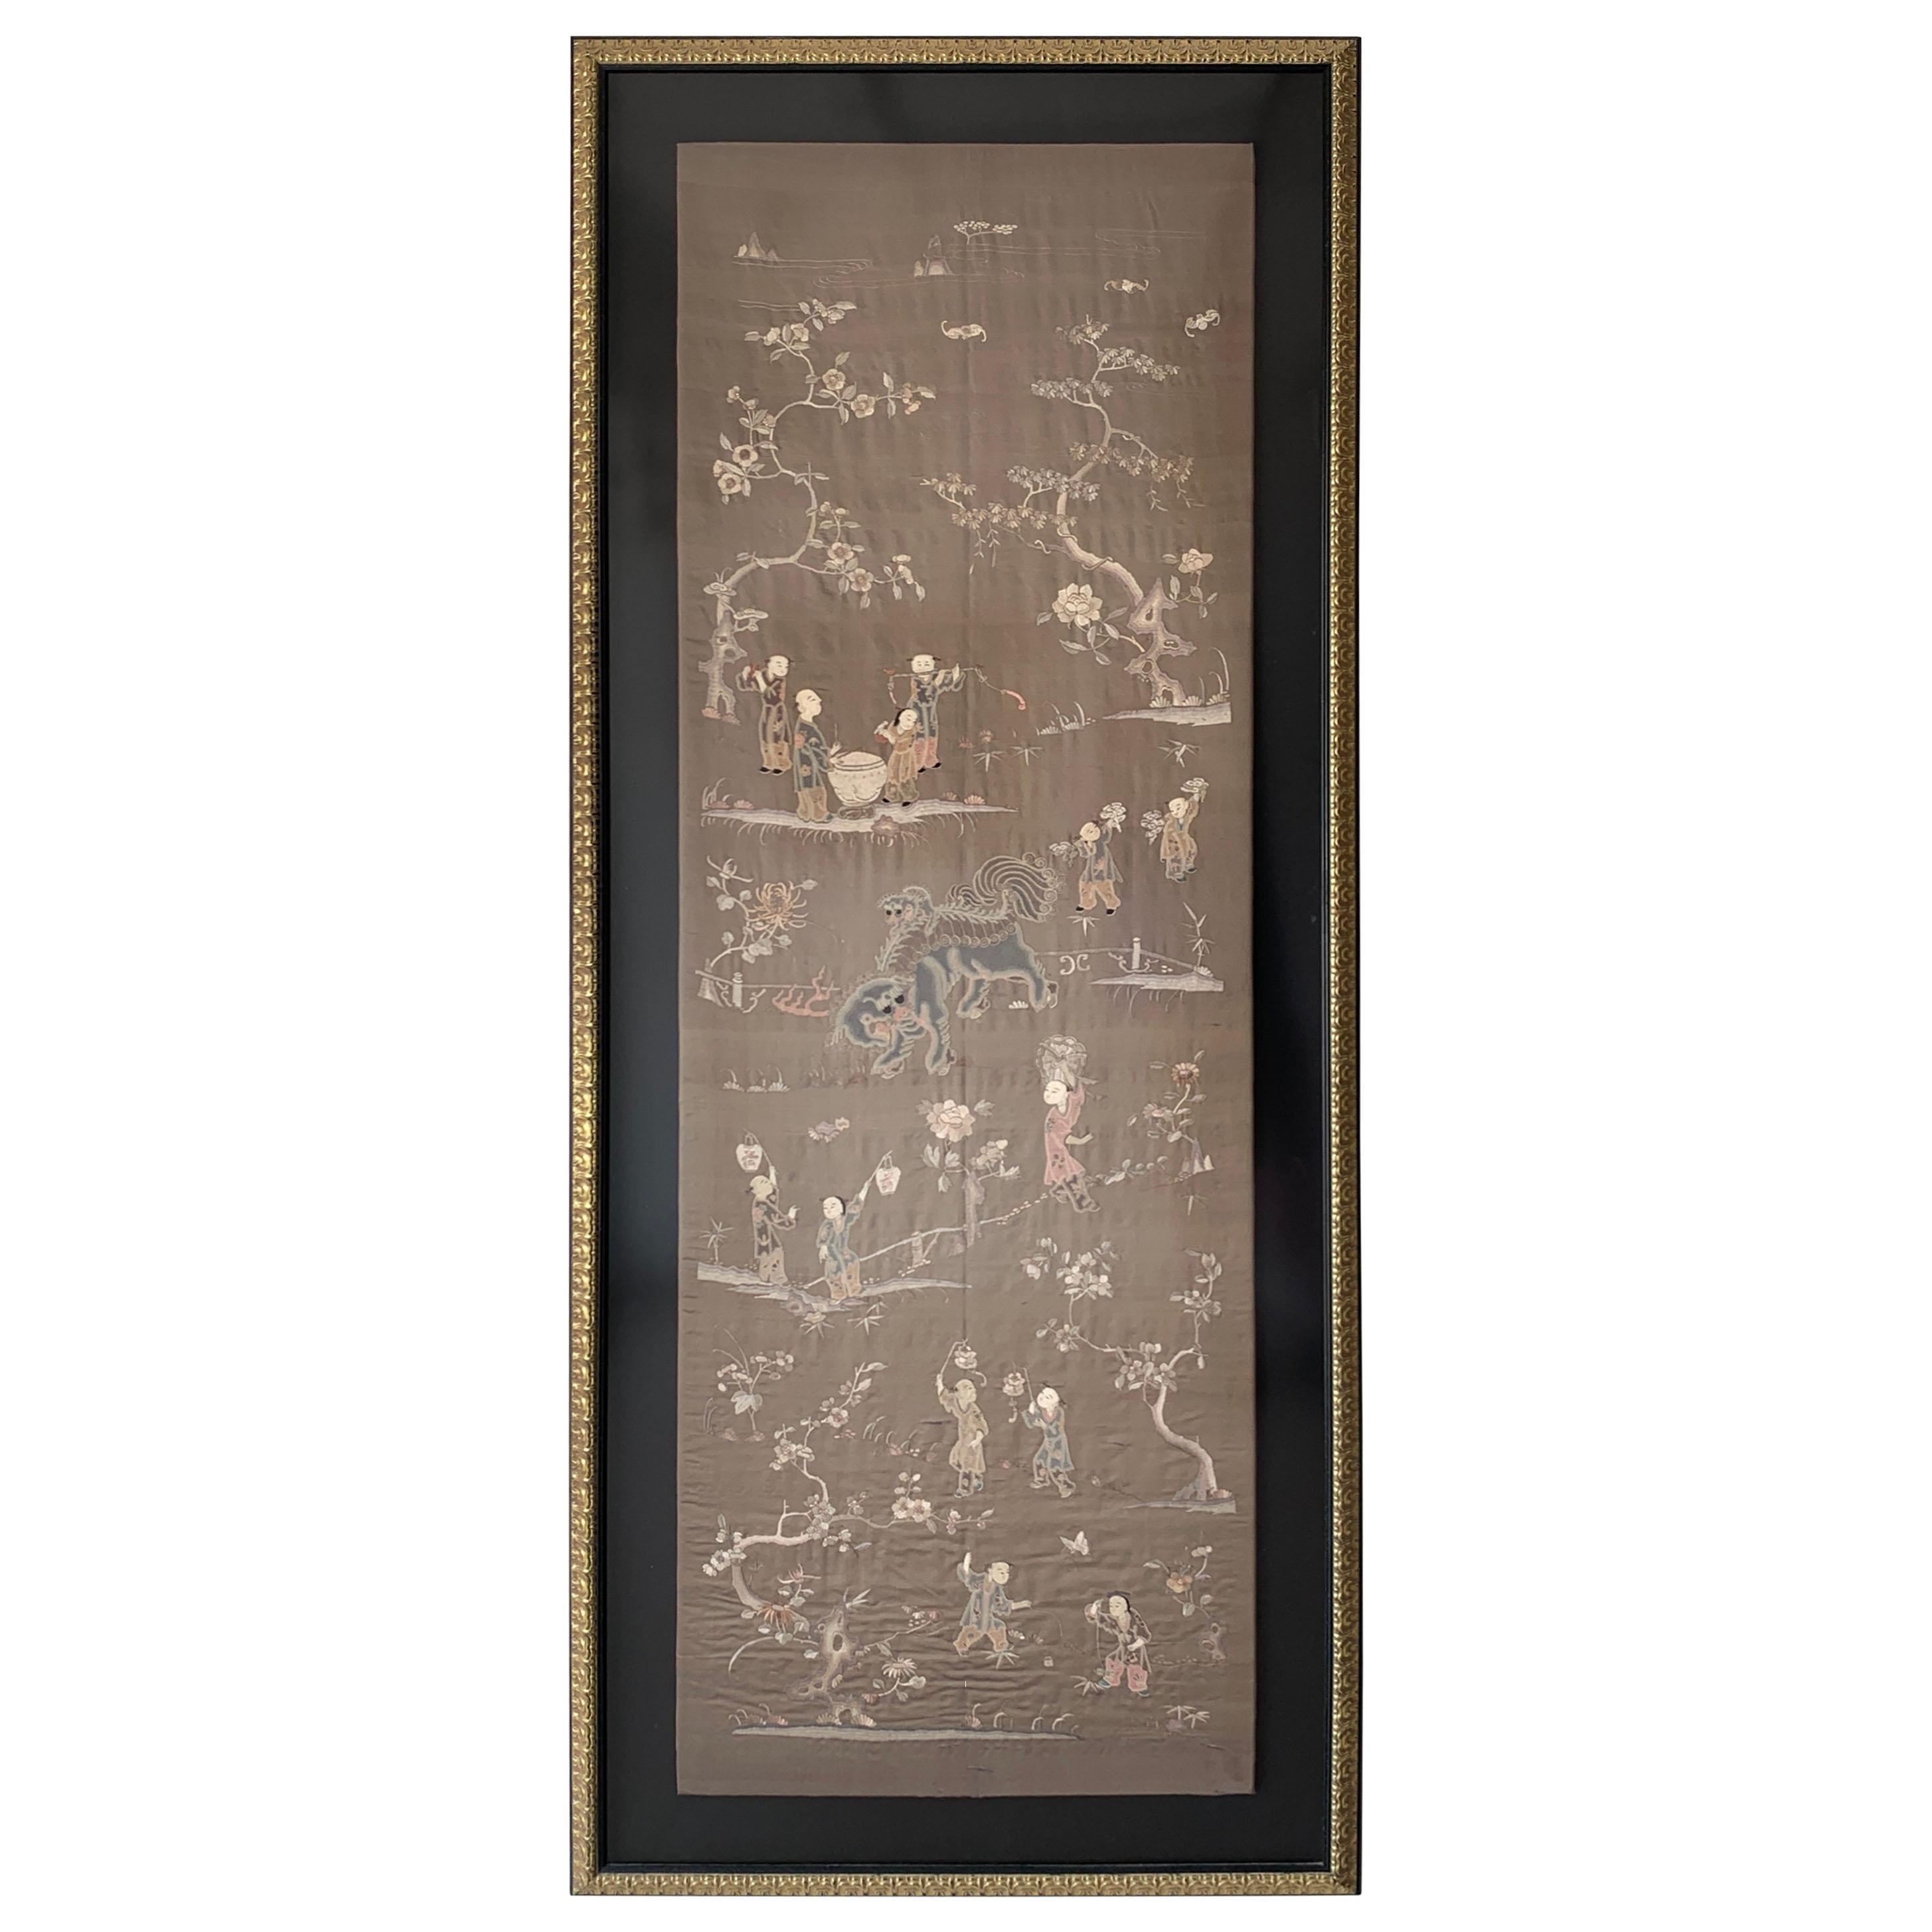 Exquisite Chinese Export Landscape Silk Embroidery For Sale